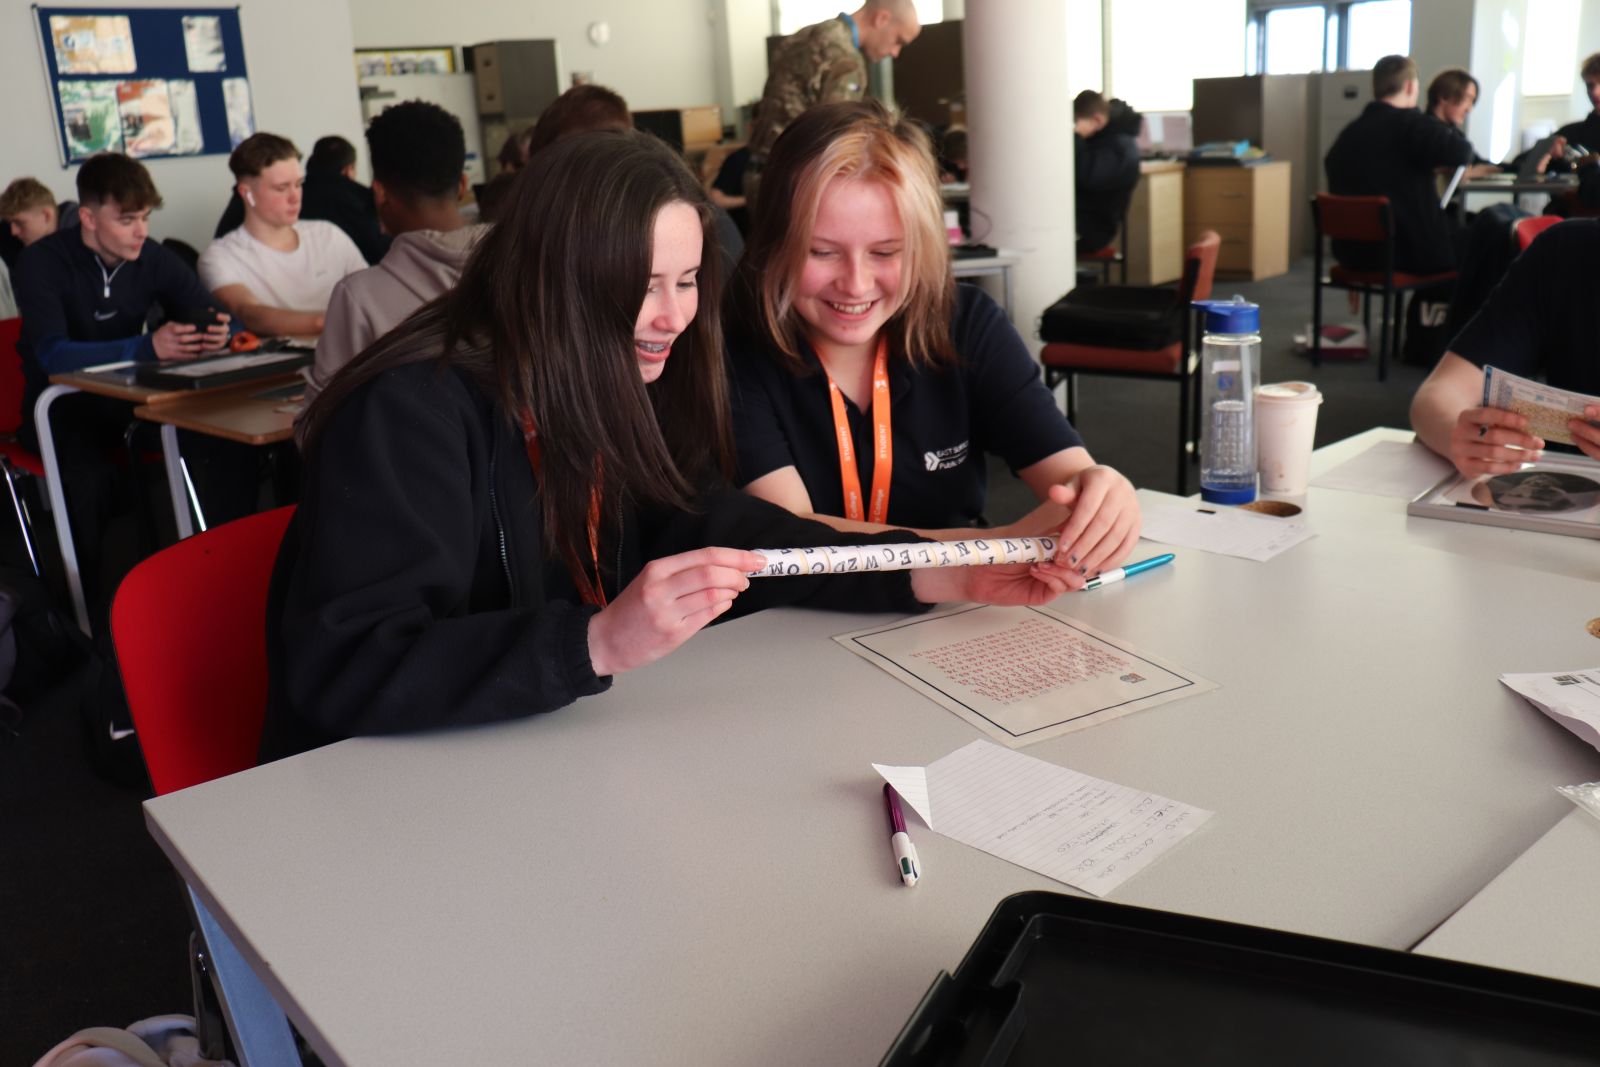 Two public services students looking at a code on a piece of fabric